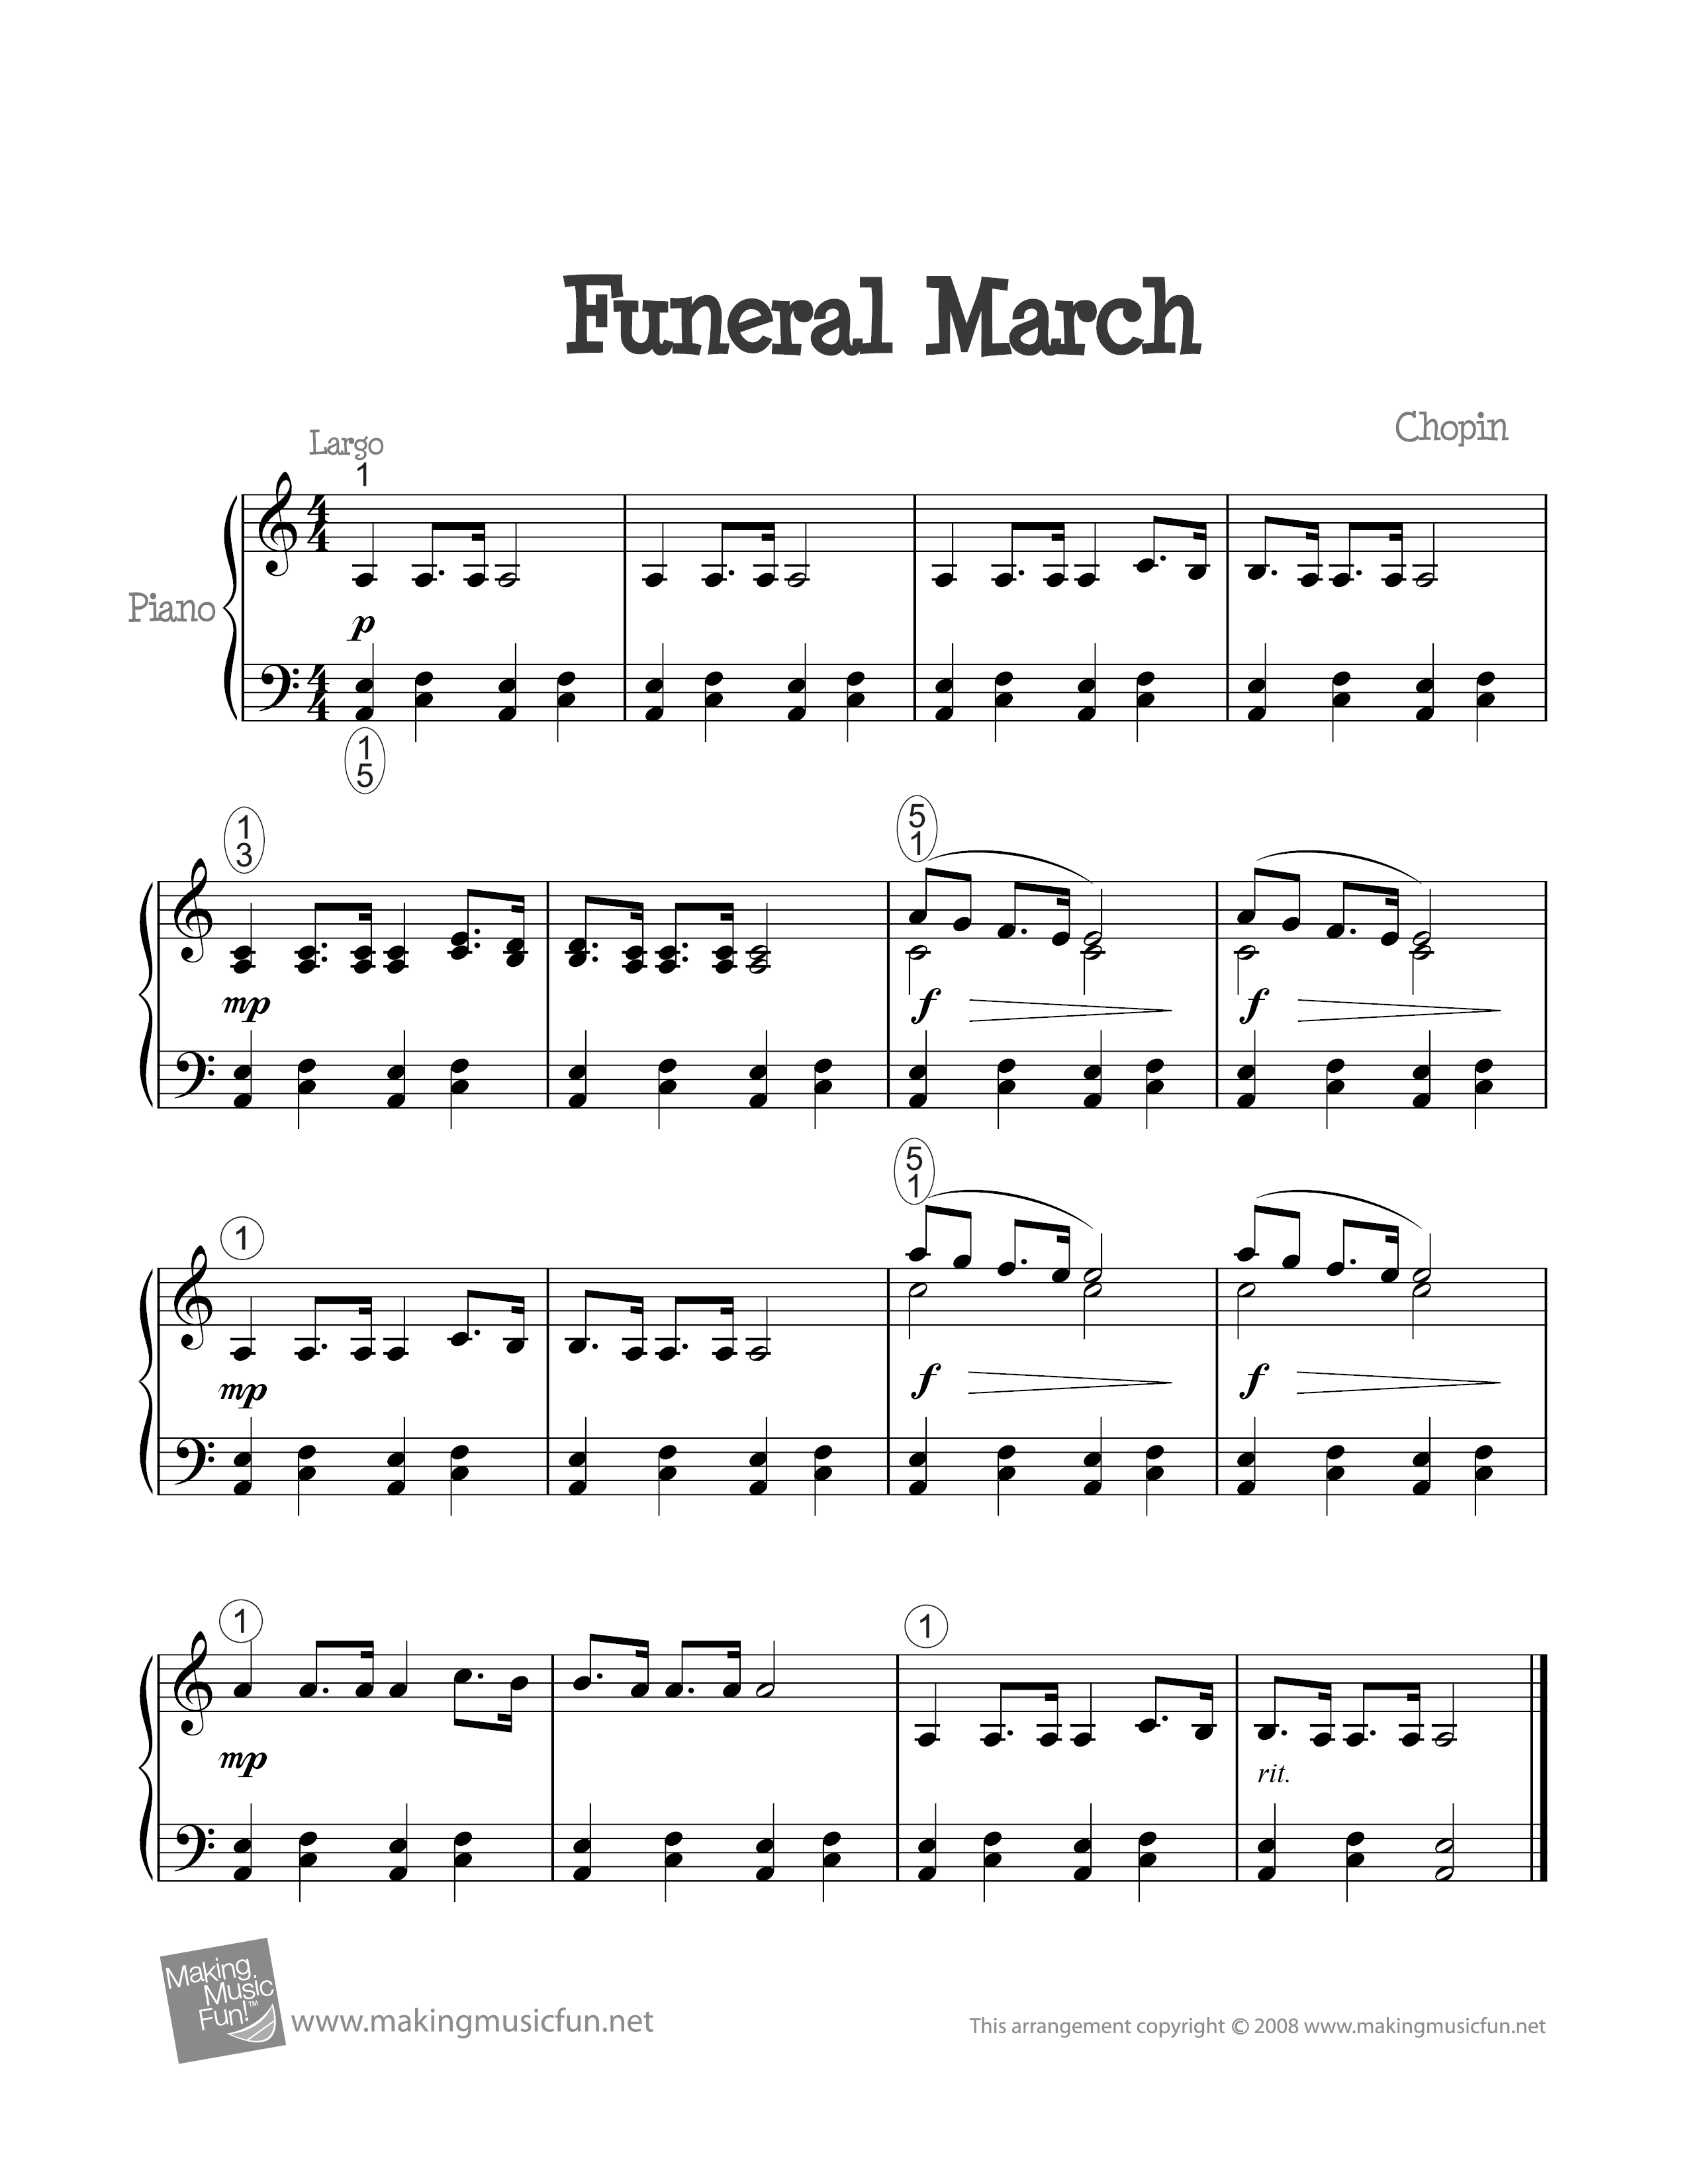 Funeral Marchピアノ譜